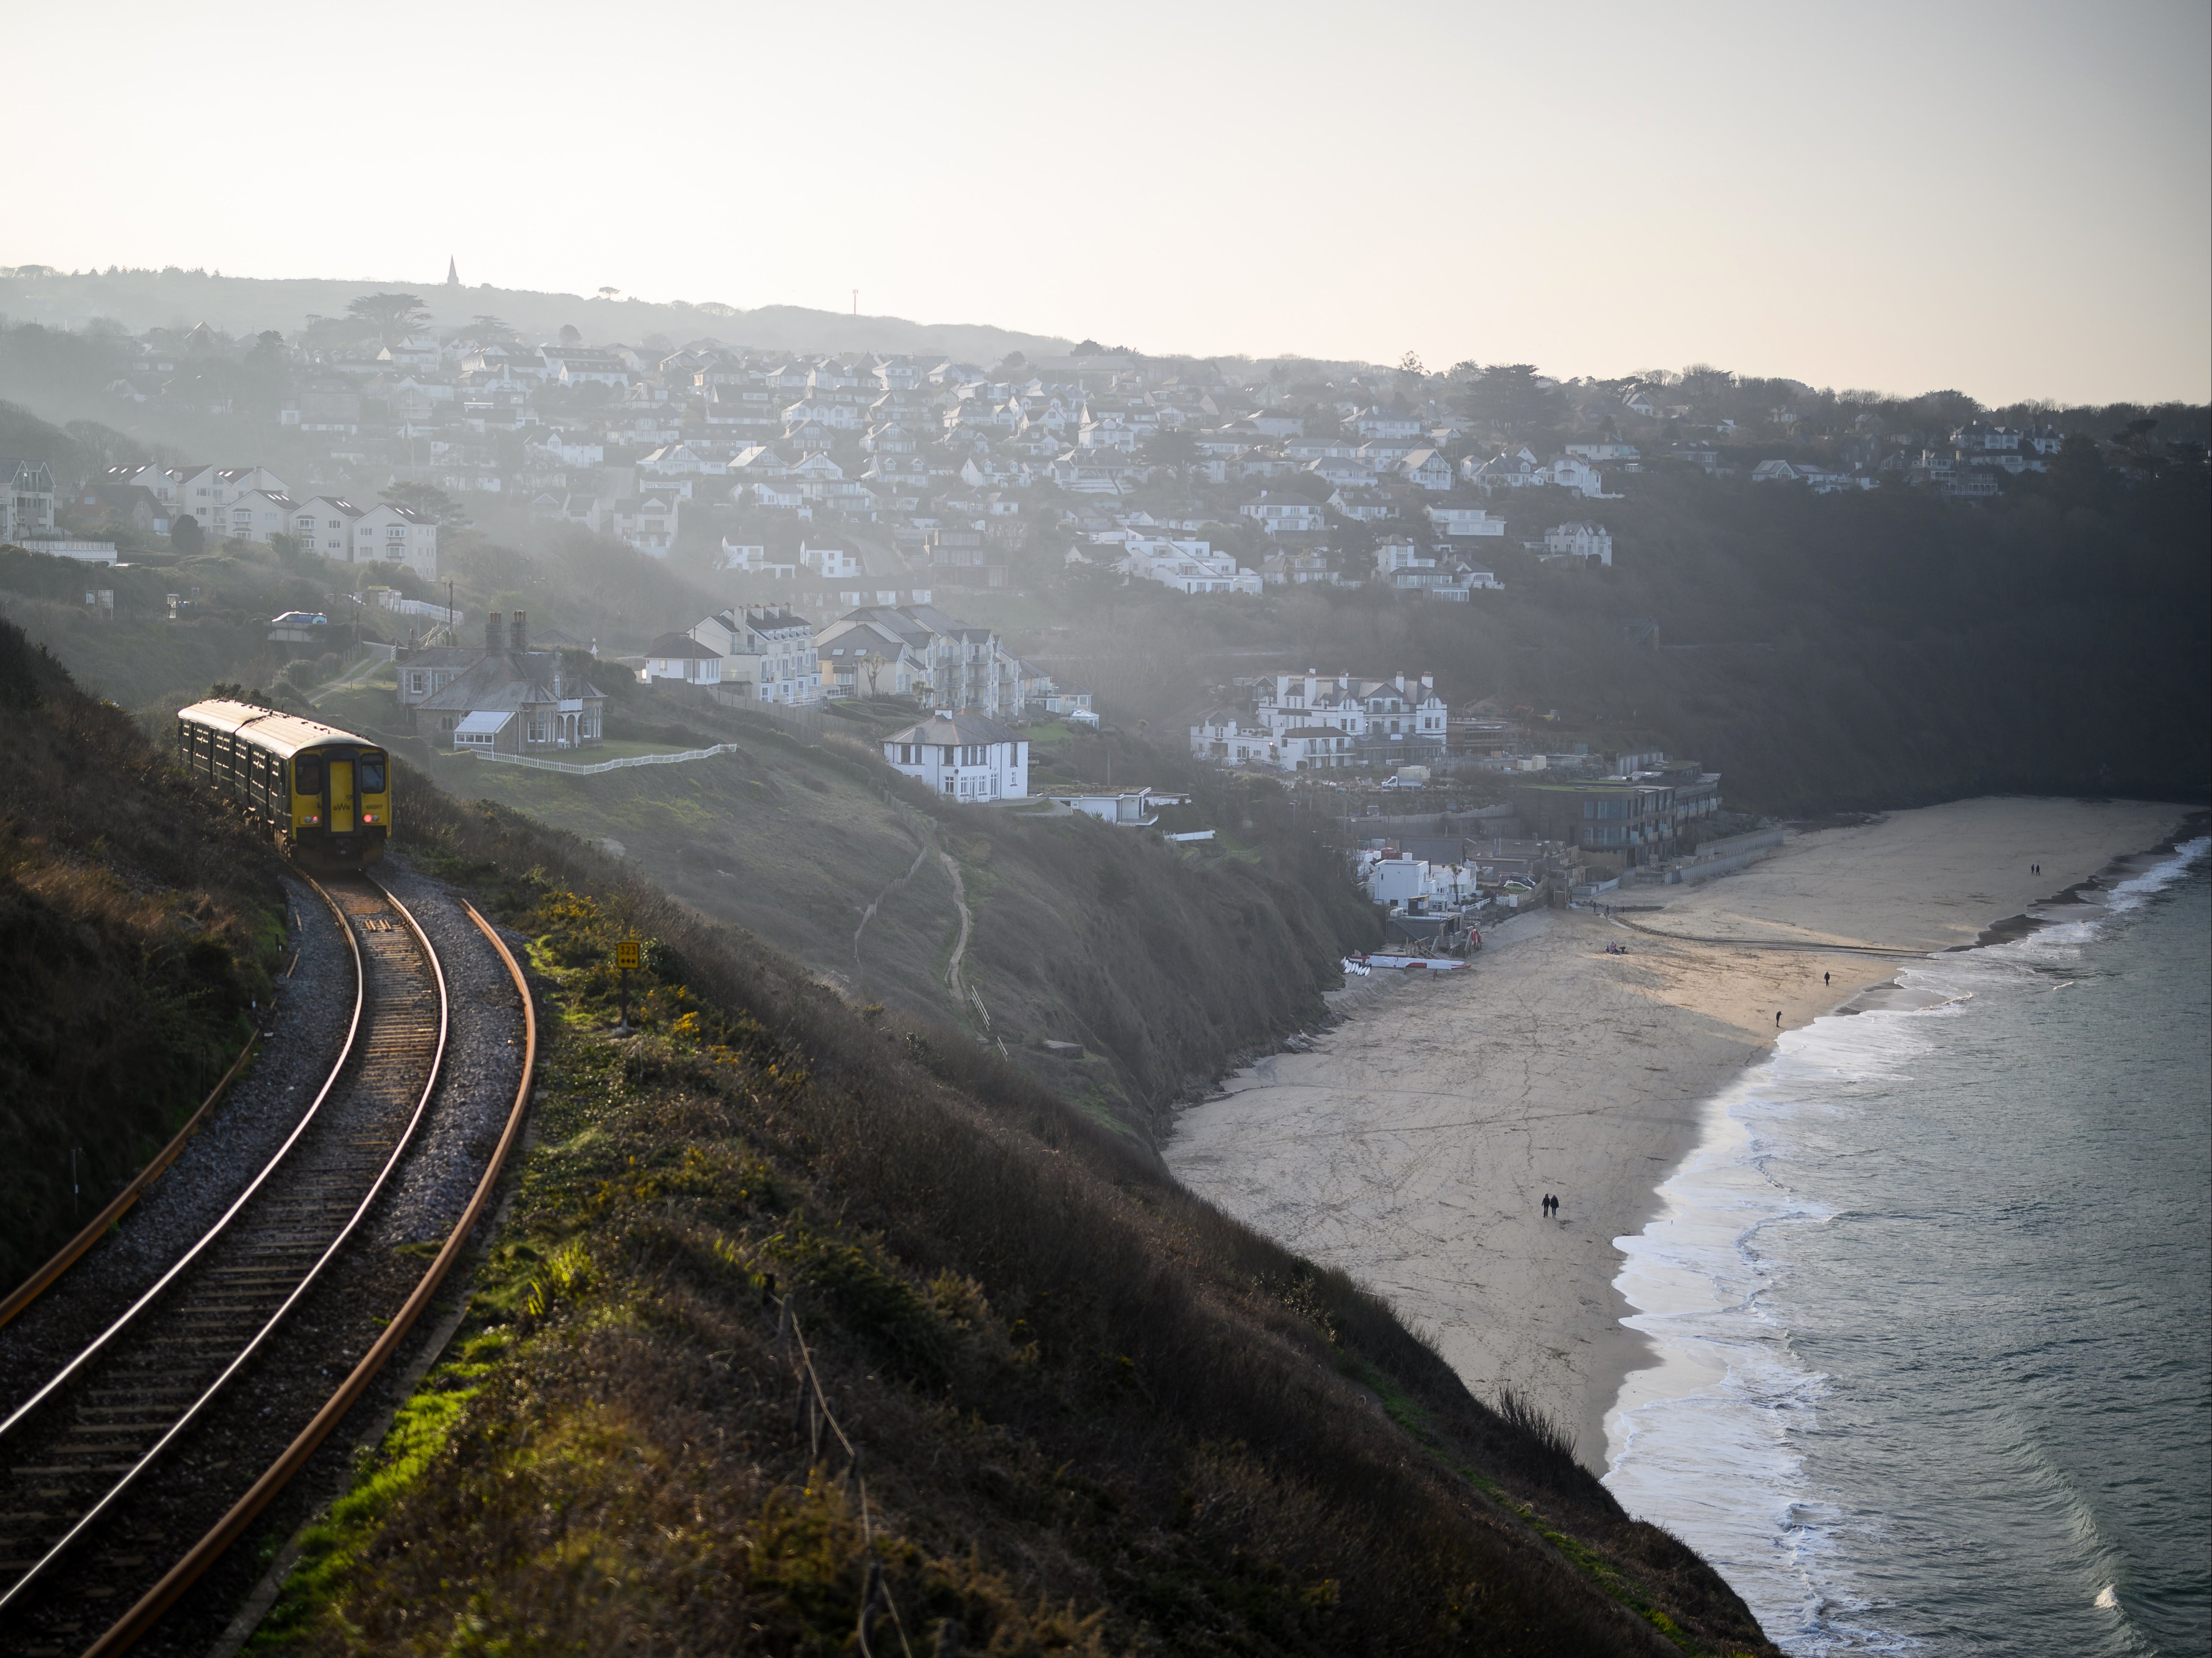 In February alone, there were more than 5 million searches for properties in Cornwall